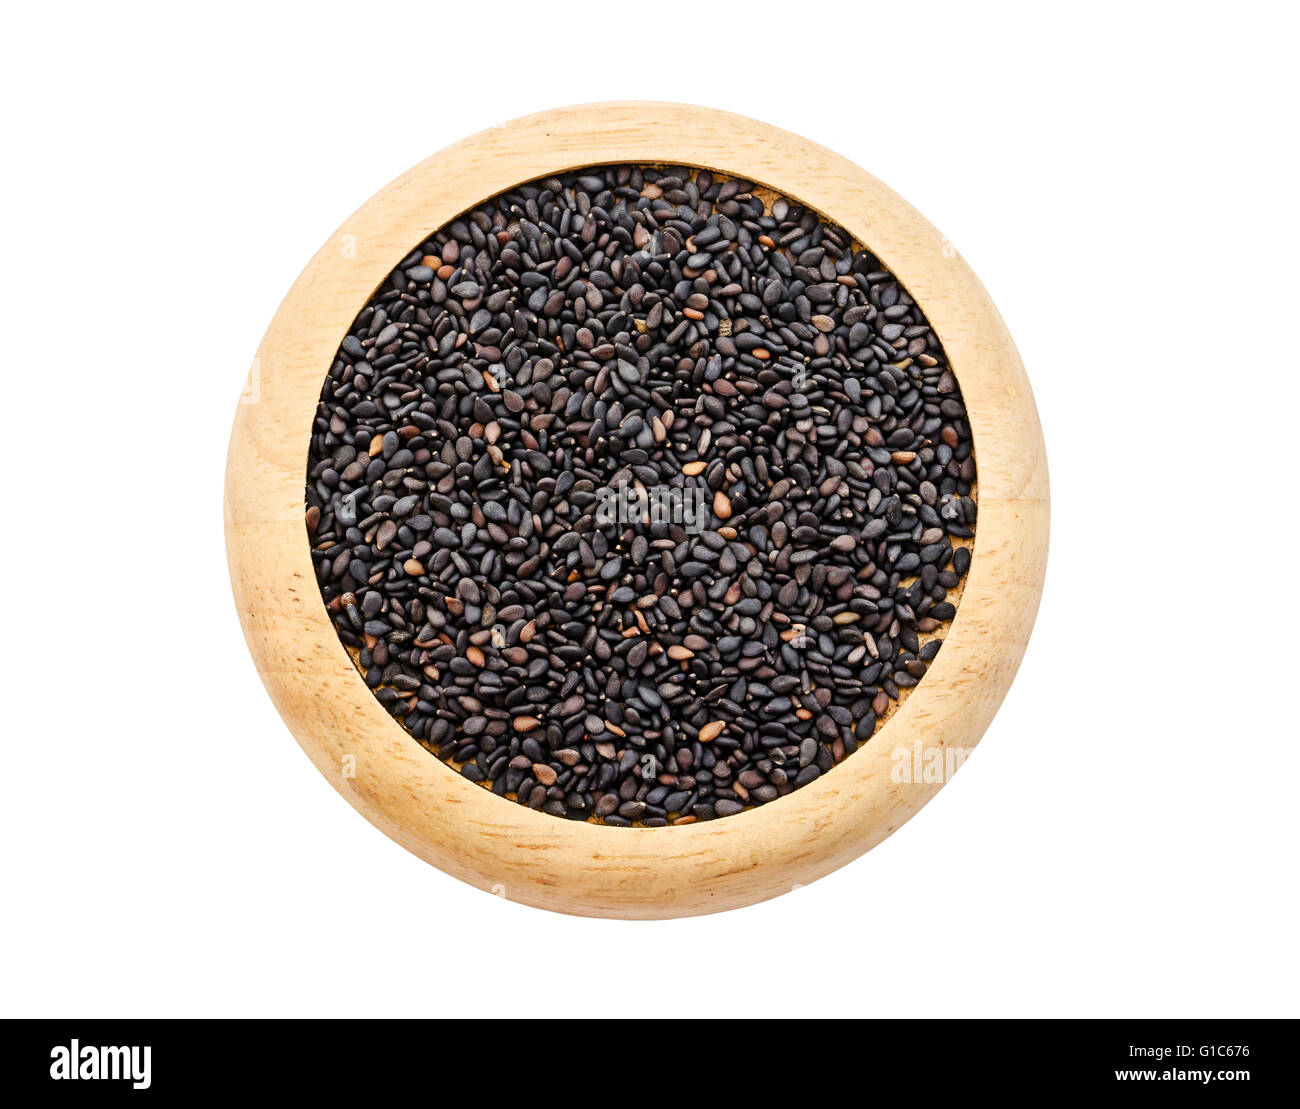 Pile of black sesame seeds in wooden dish isolated on white background, Save clipping path. Stock Photo